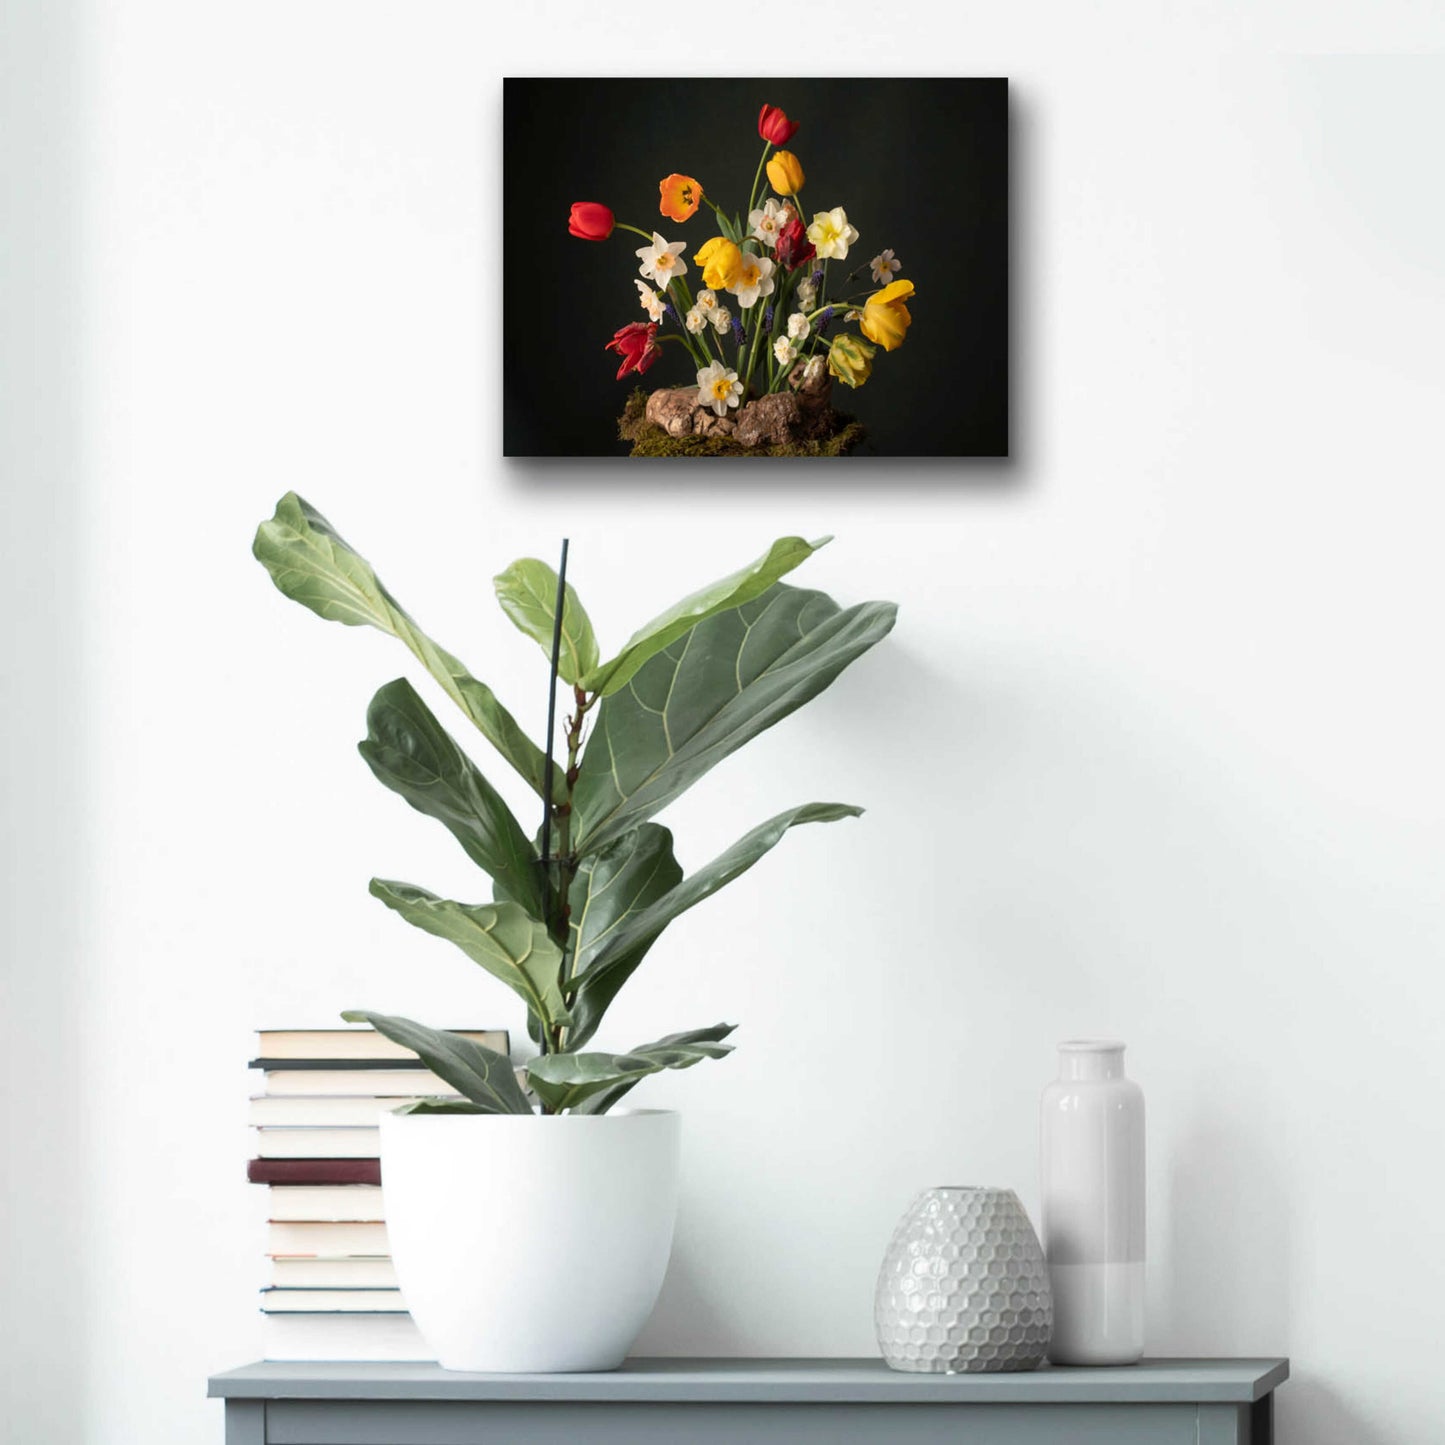 Epic Art 'Spring Fling Blooms' by Leah McLean, Acrylic Glass Wall Art,16x12